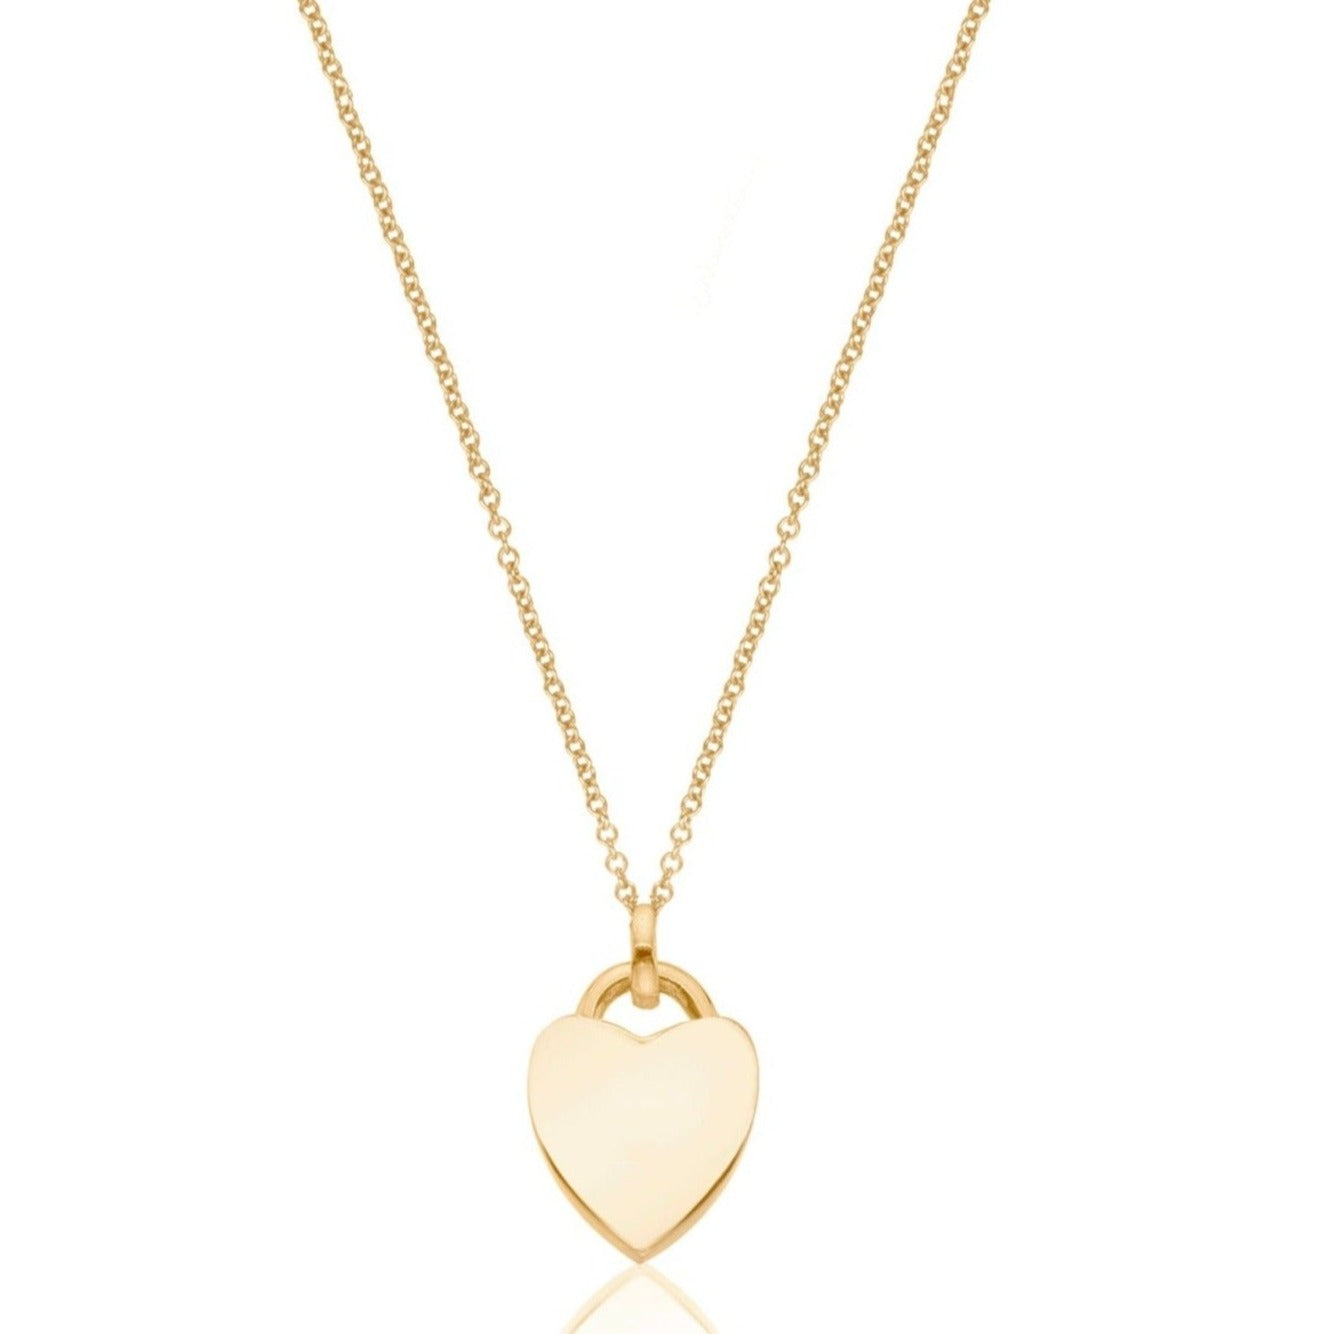 Gold heart padlock pendant necklace on a white background